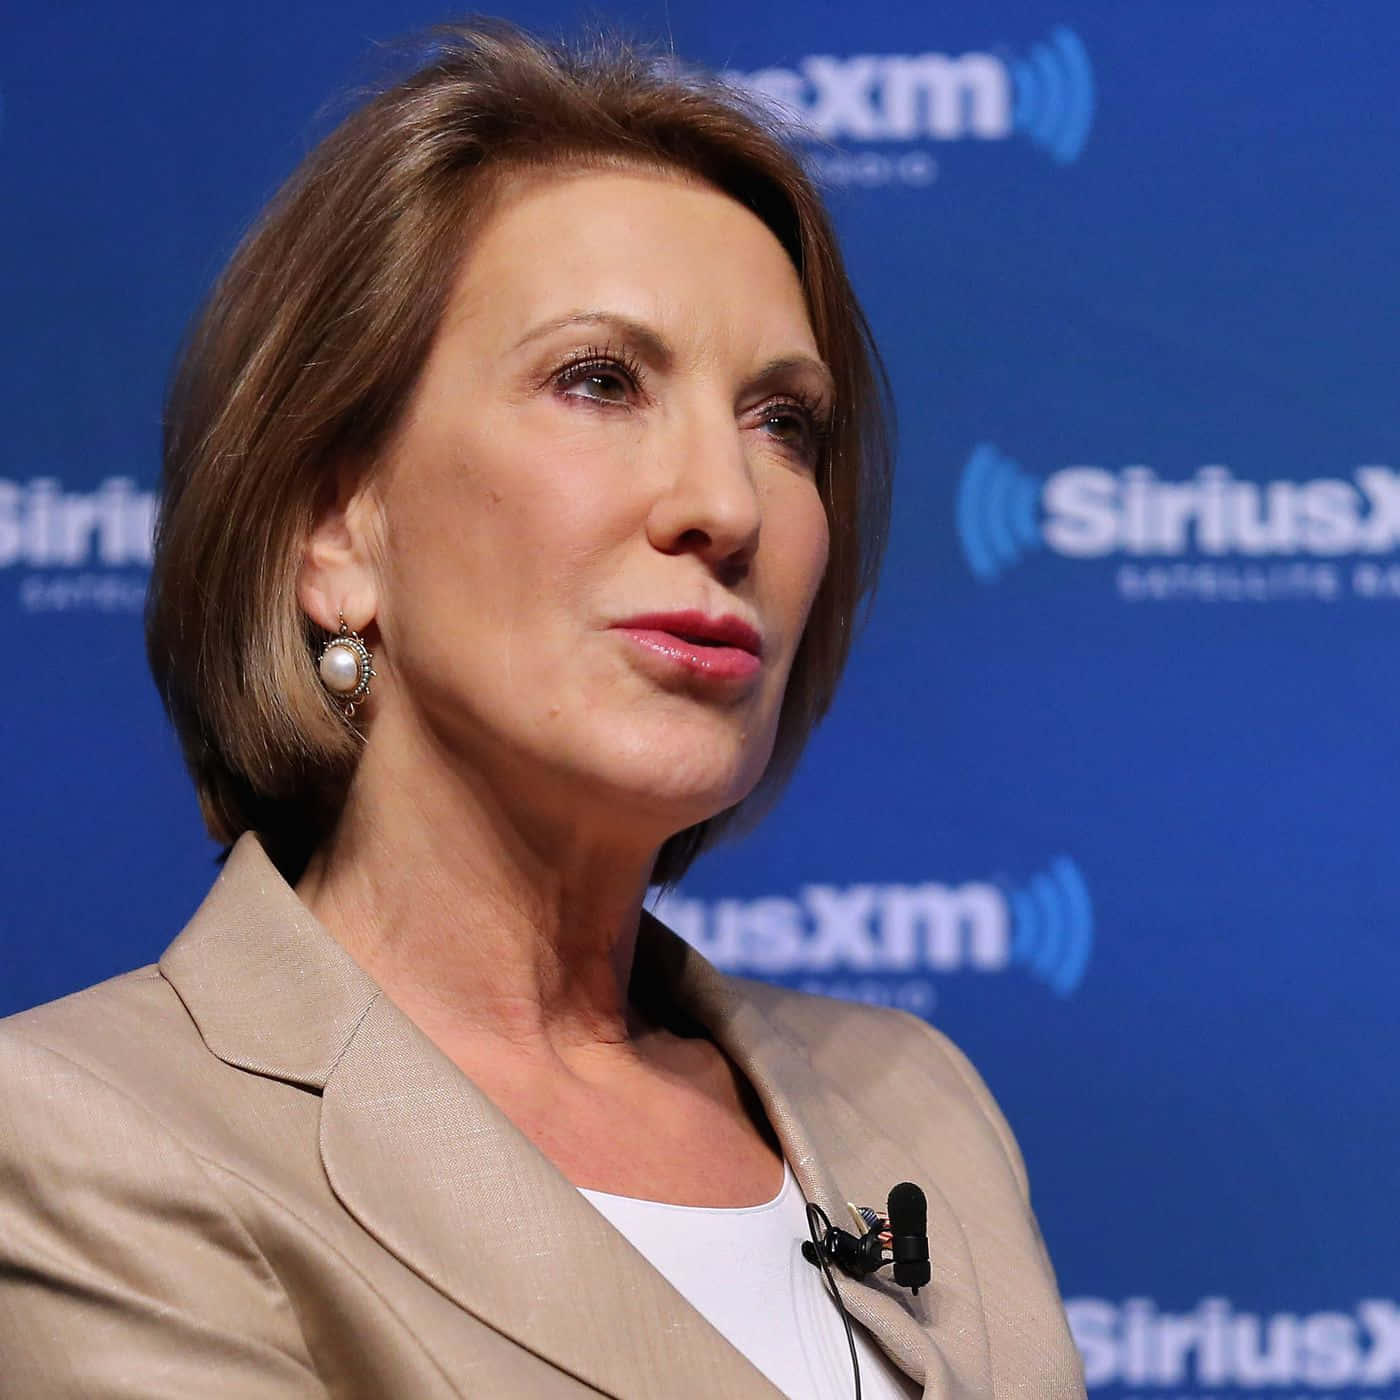 Carly Fiorina during a Radio Interview Wallpaper